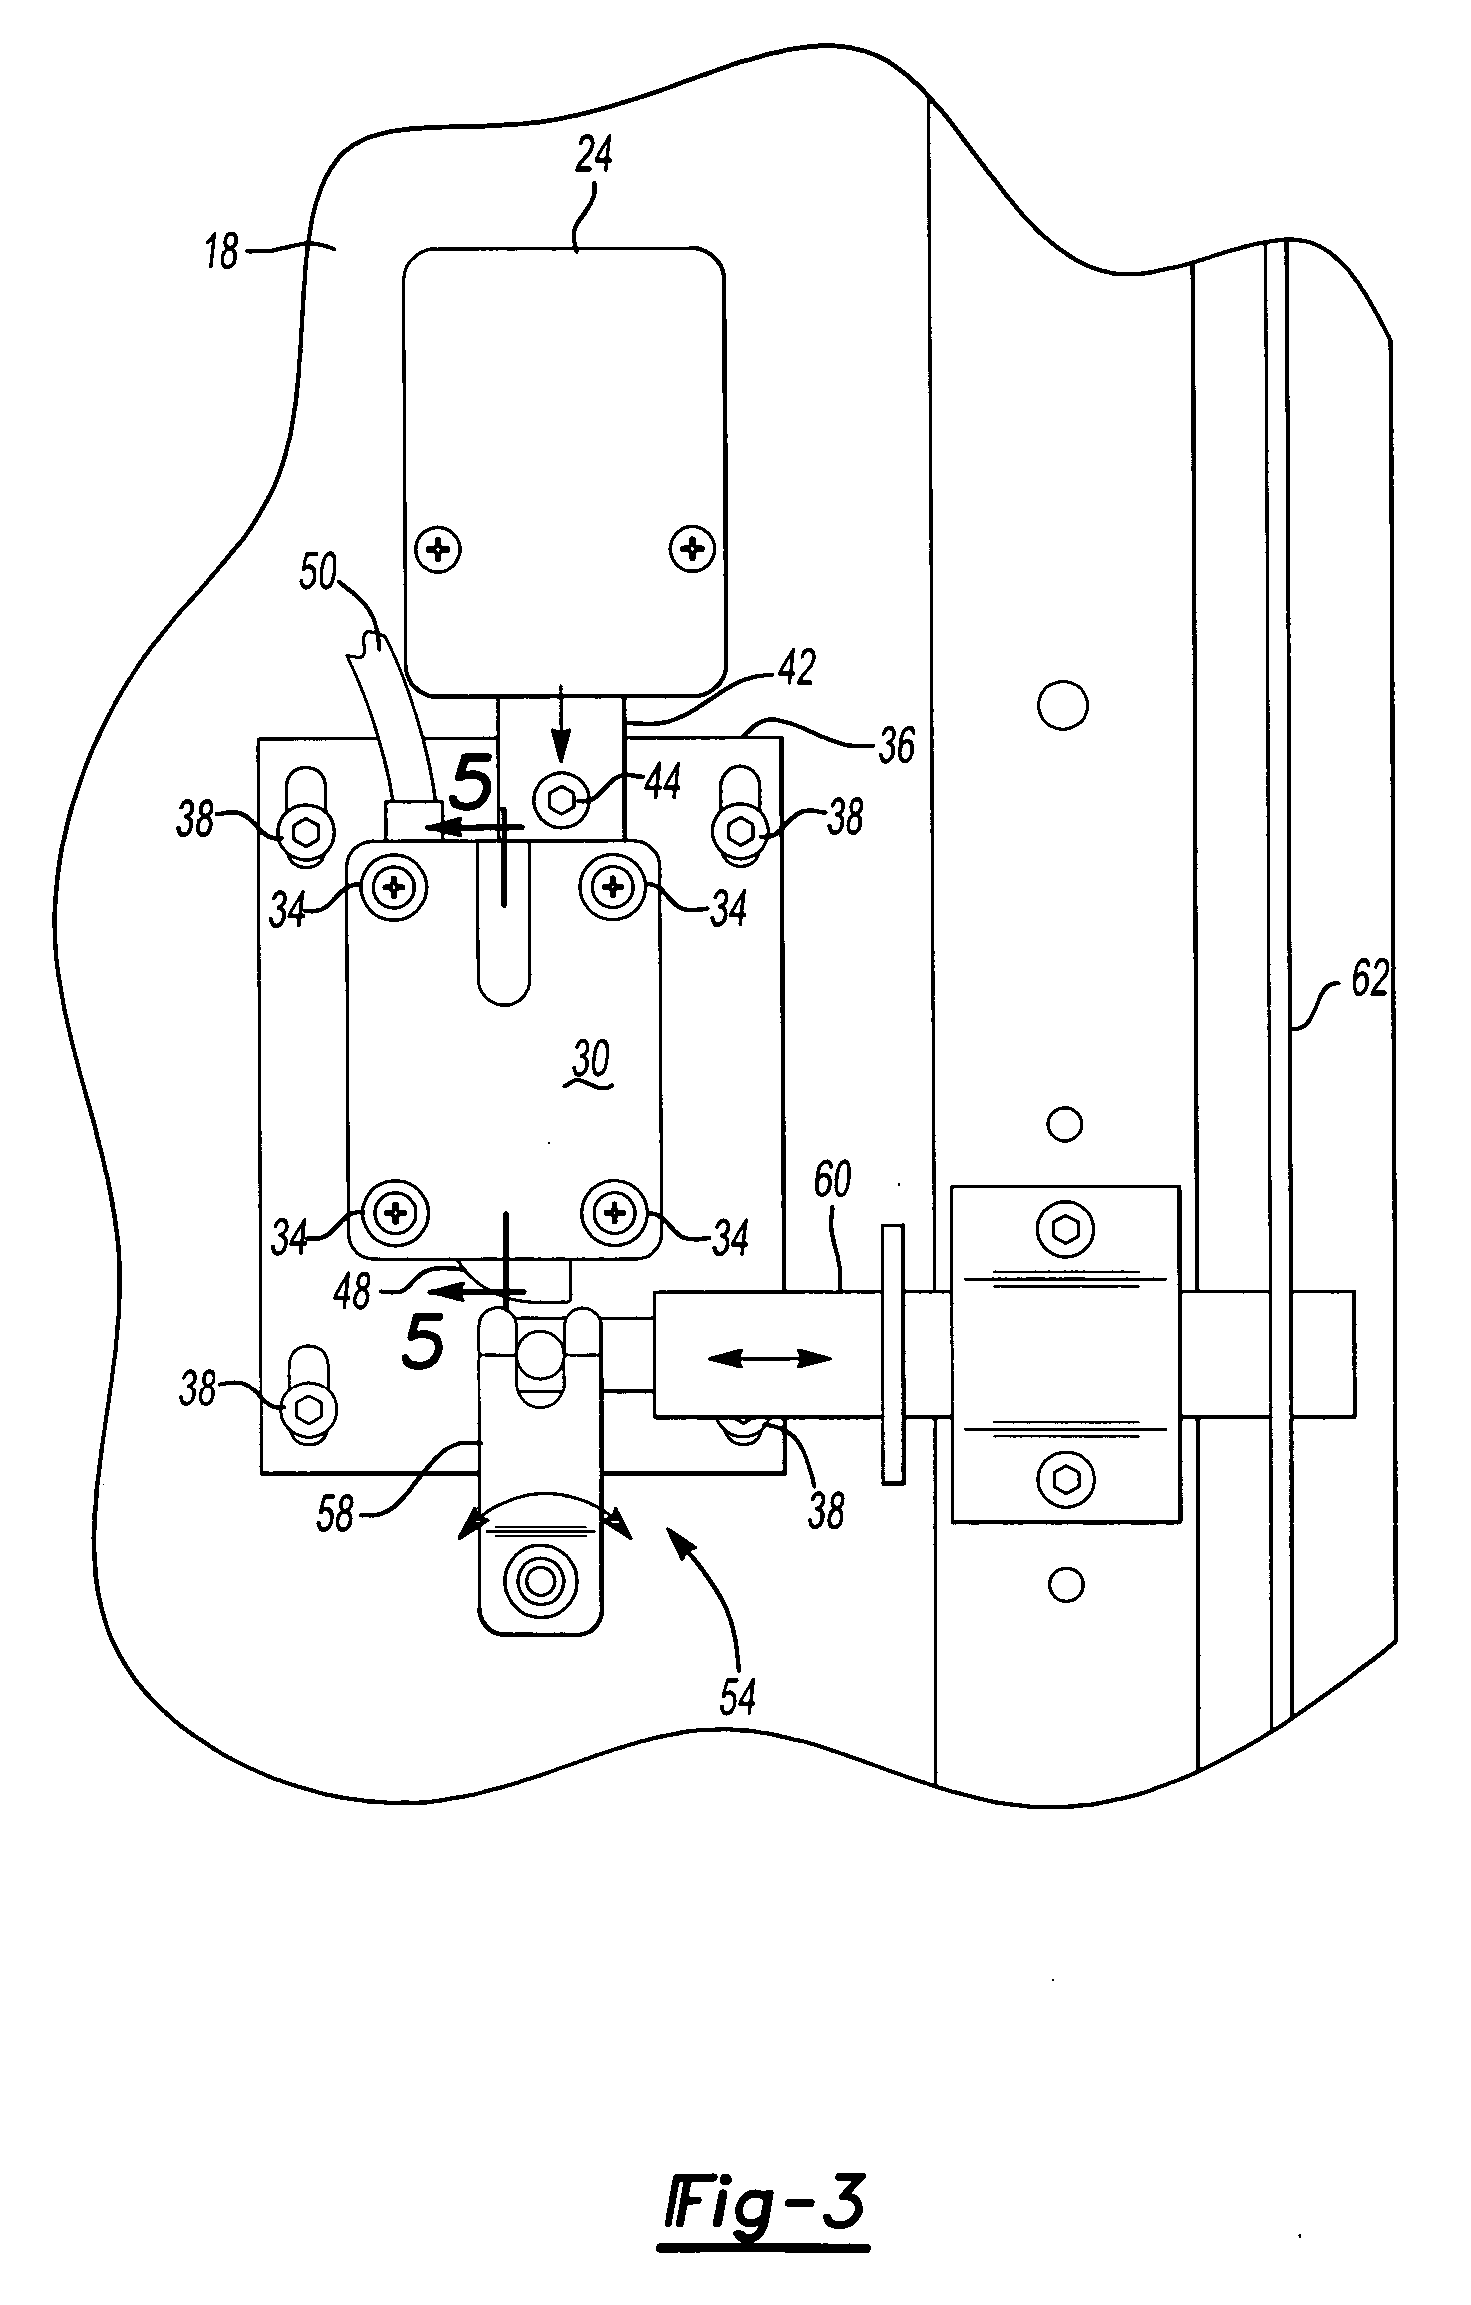 Manual override for use with an electric safe